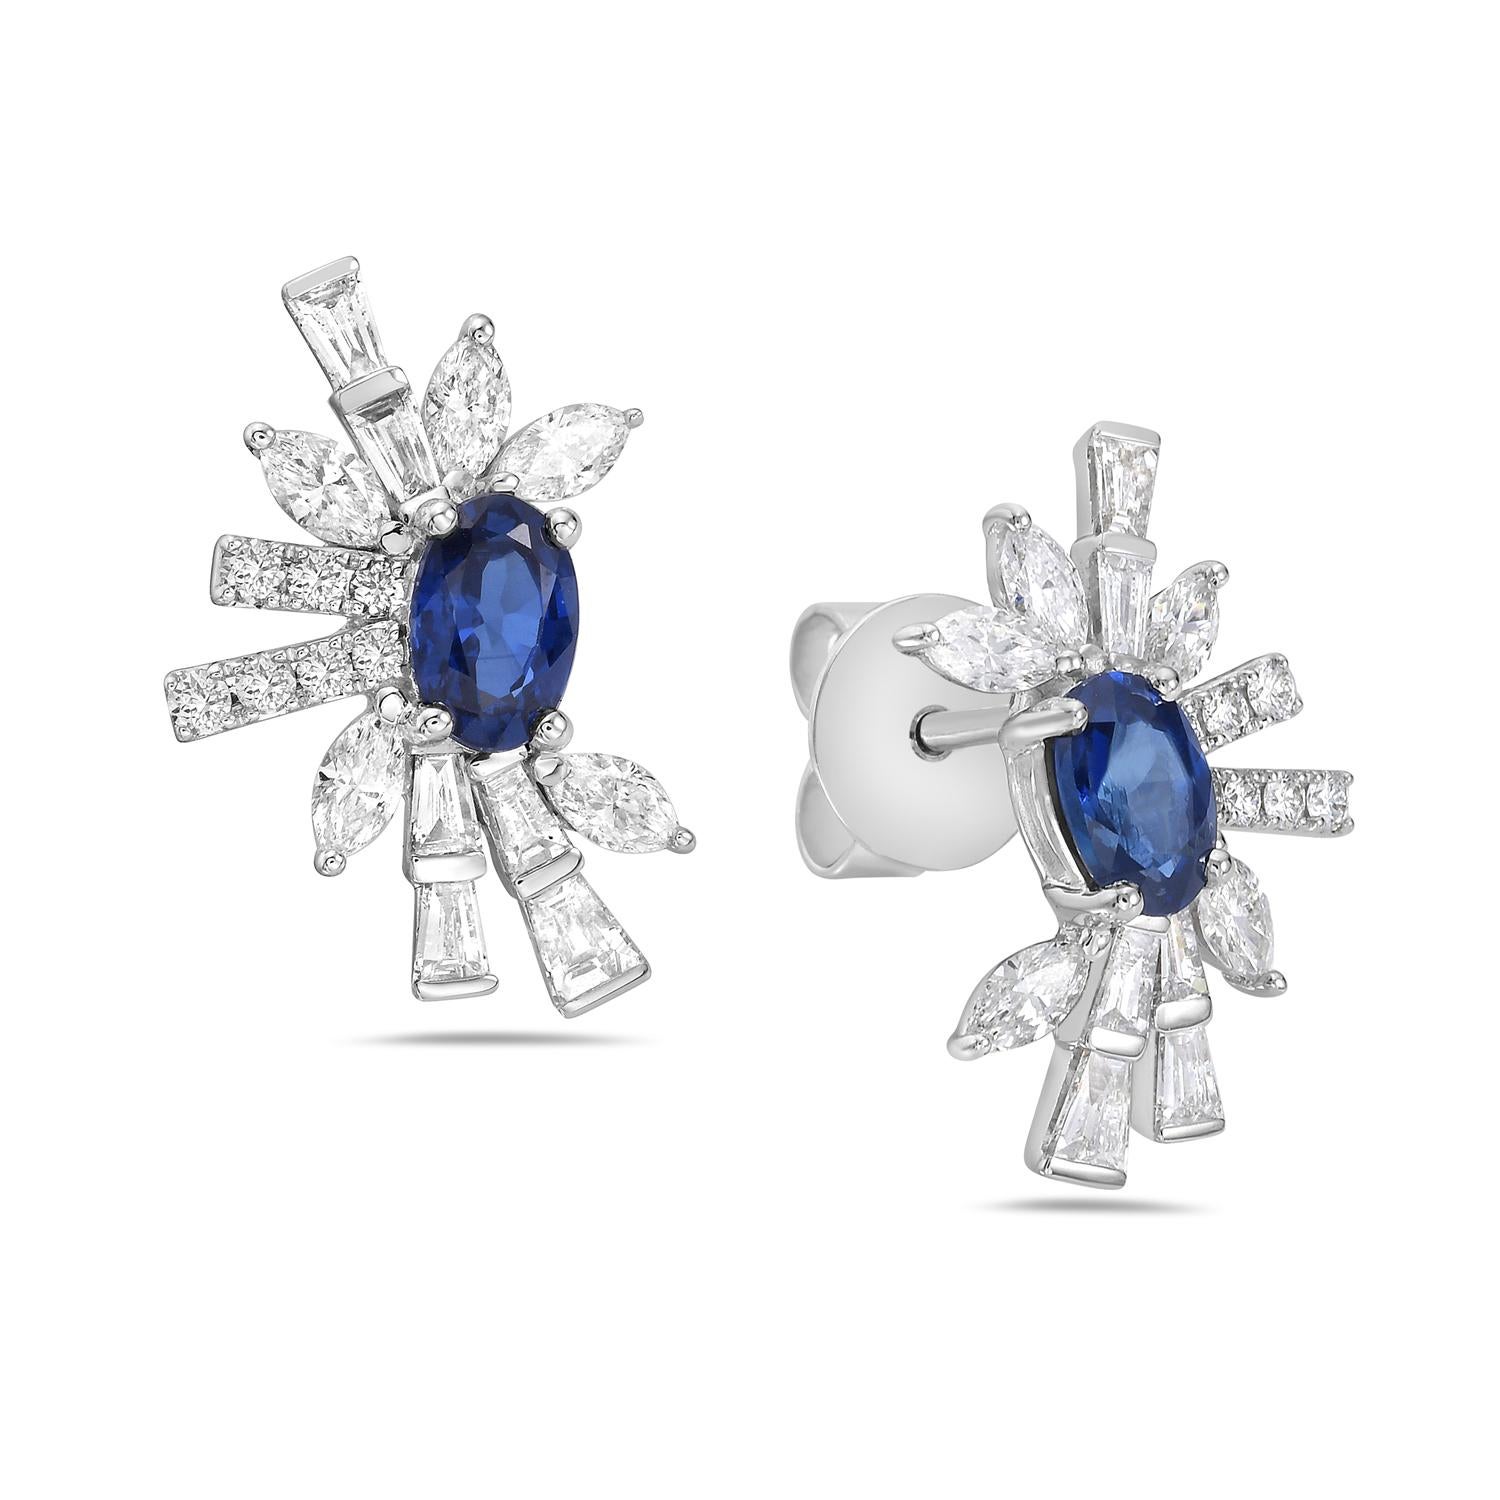 Art Deco Baguette & Pear Shaped 18k Stud Earrings With Blue Sapphire In Centre For Sale